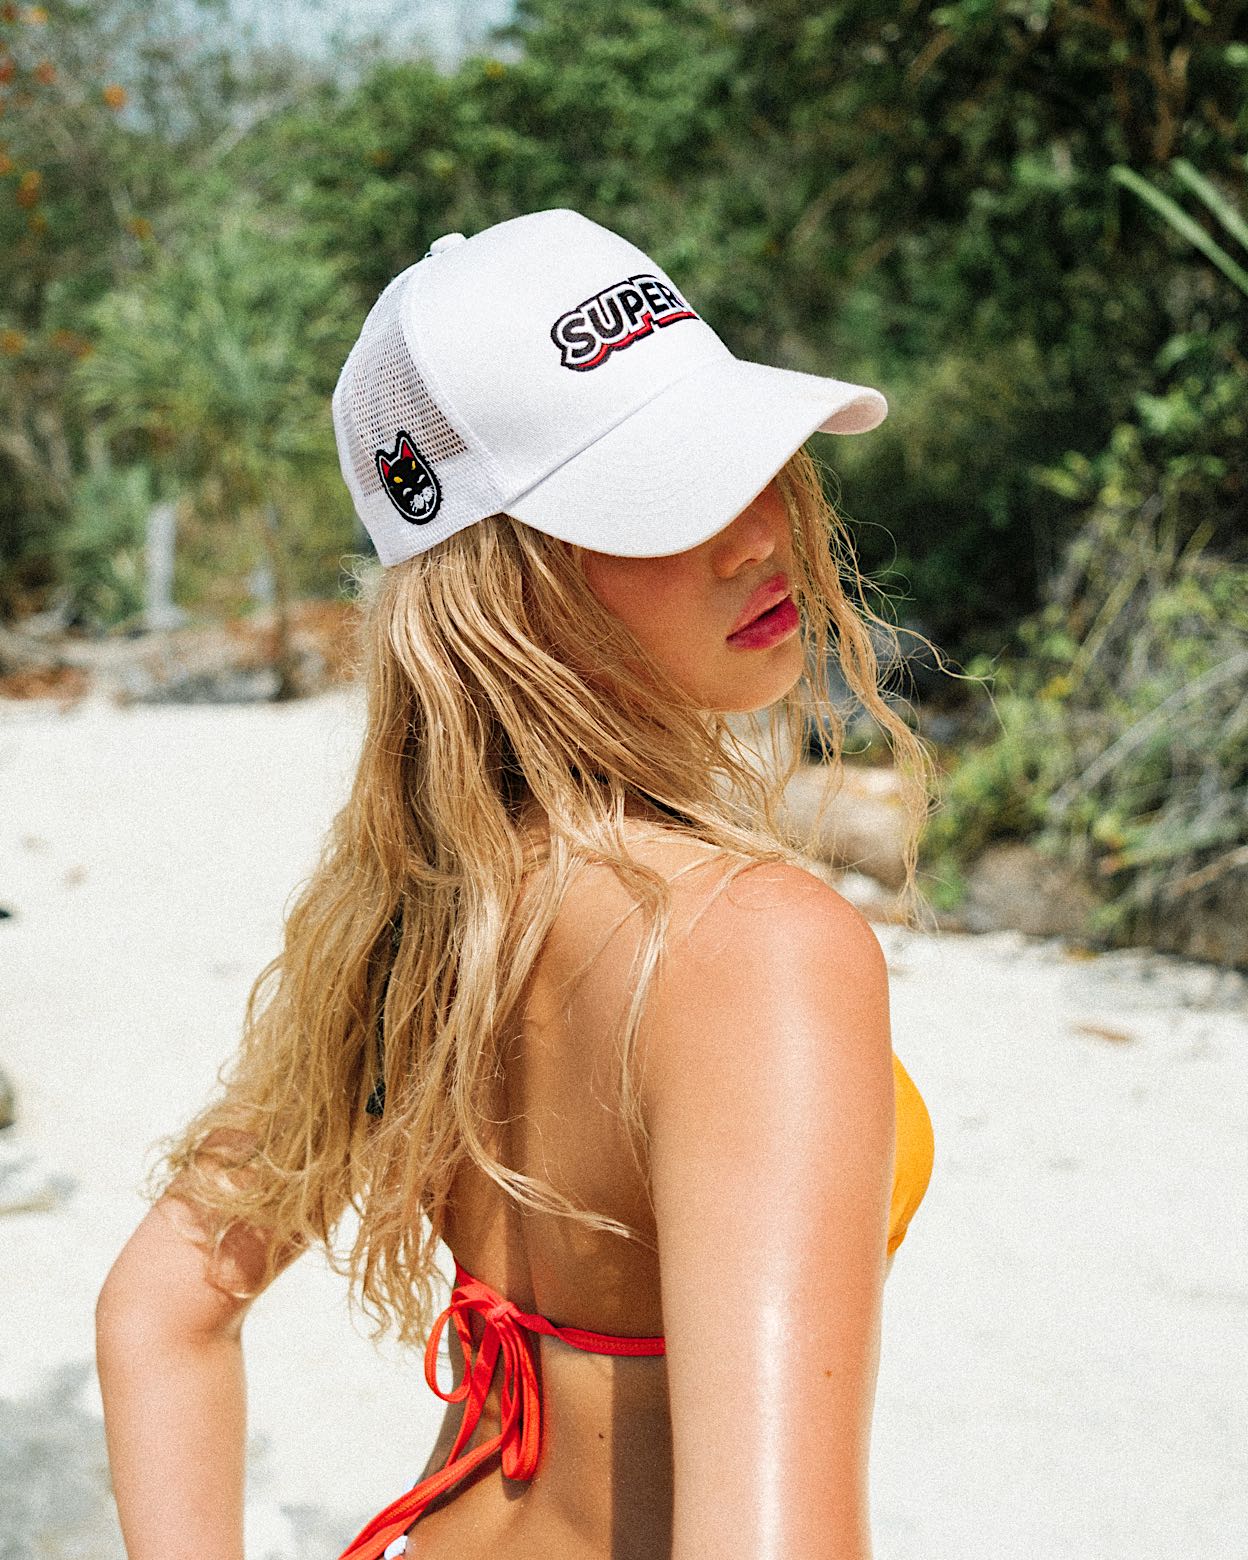 Close-up shot showcasing the top details, including the super white snapback hat, of a model in a High Waisted Palette Orange Thong bikini with adjustable sides and a vibrant pink, white, and black outline by the beach.